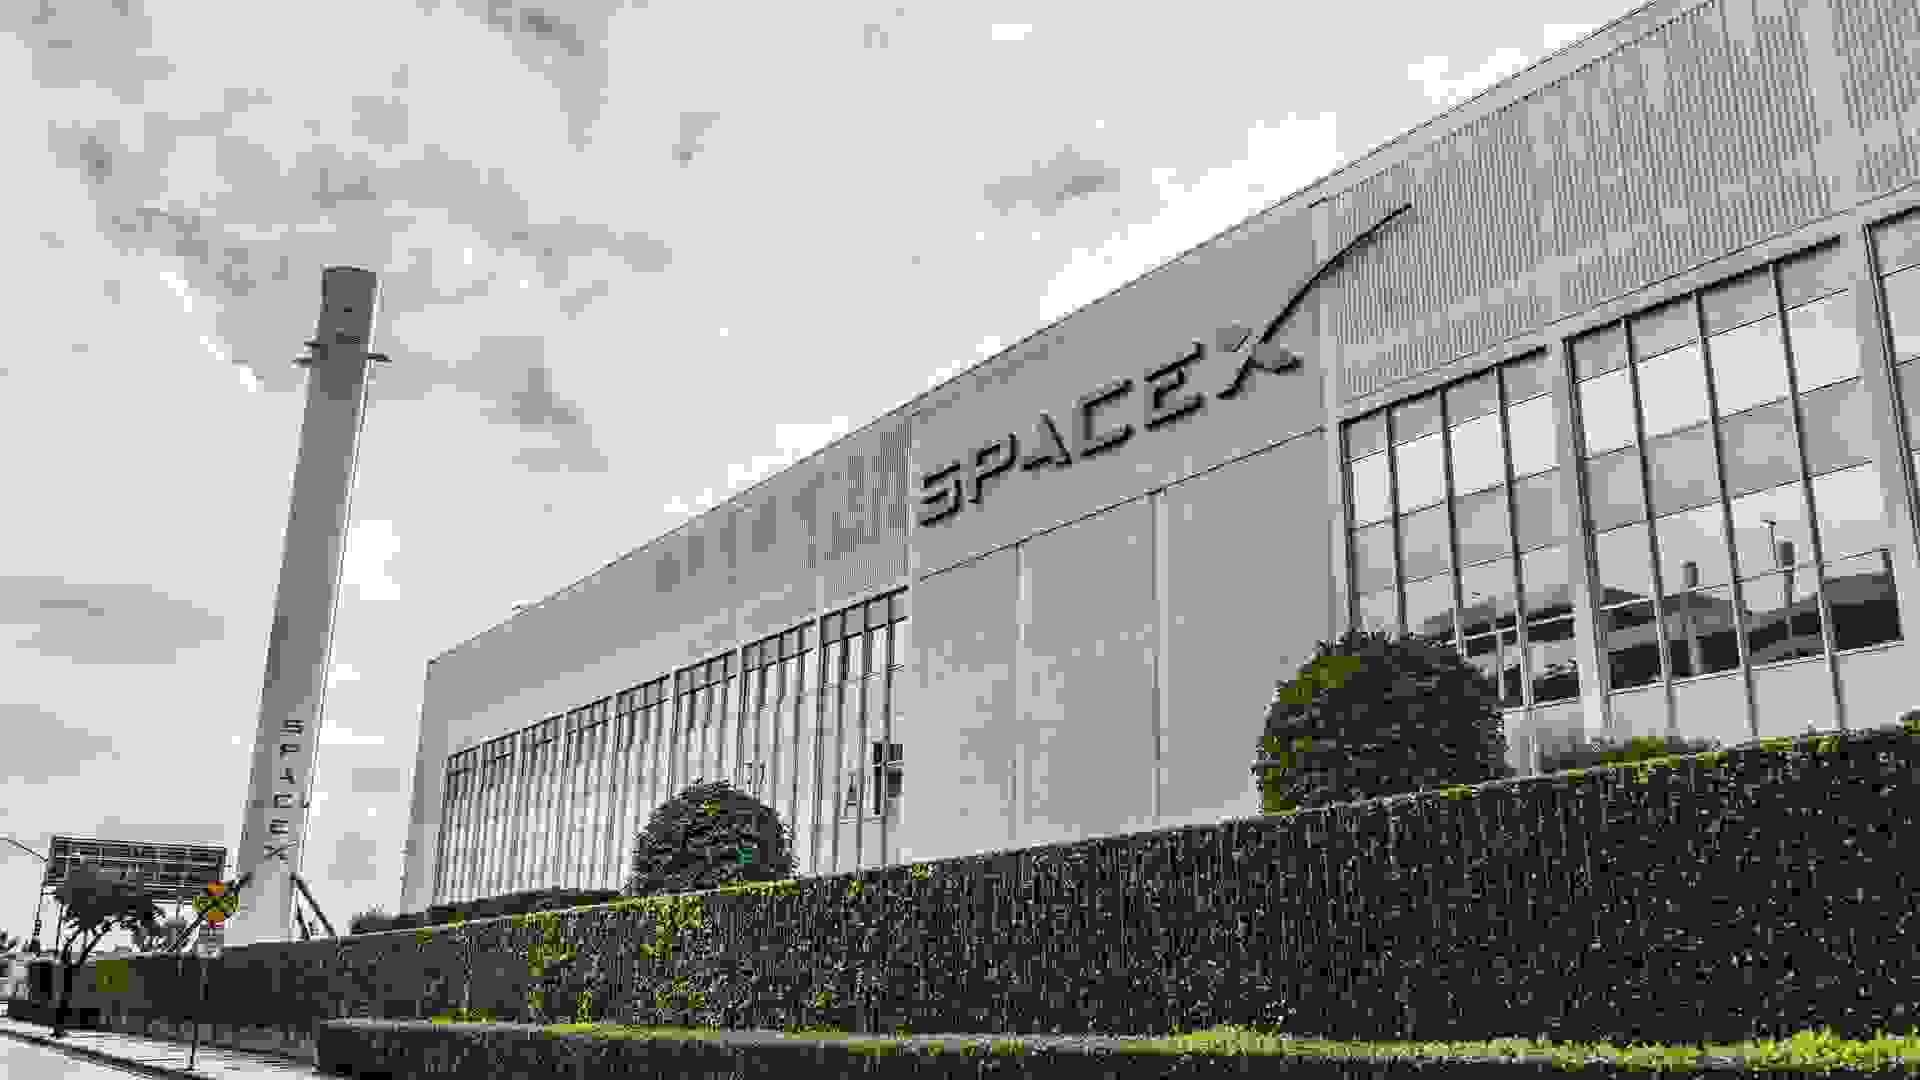 Dec 8, 2019 Hawthorne / Los Angeles / CA / USA - SpaceX (Space Exploration Technologies Corp.